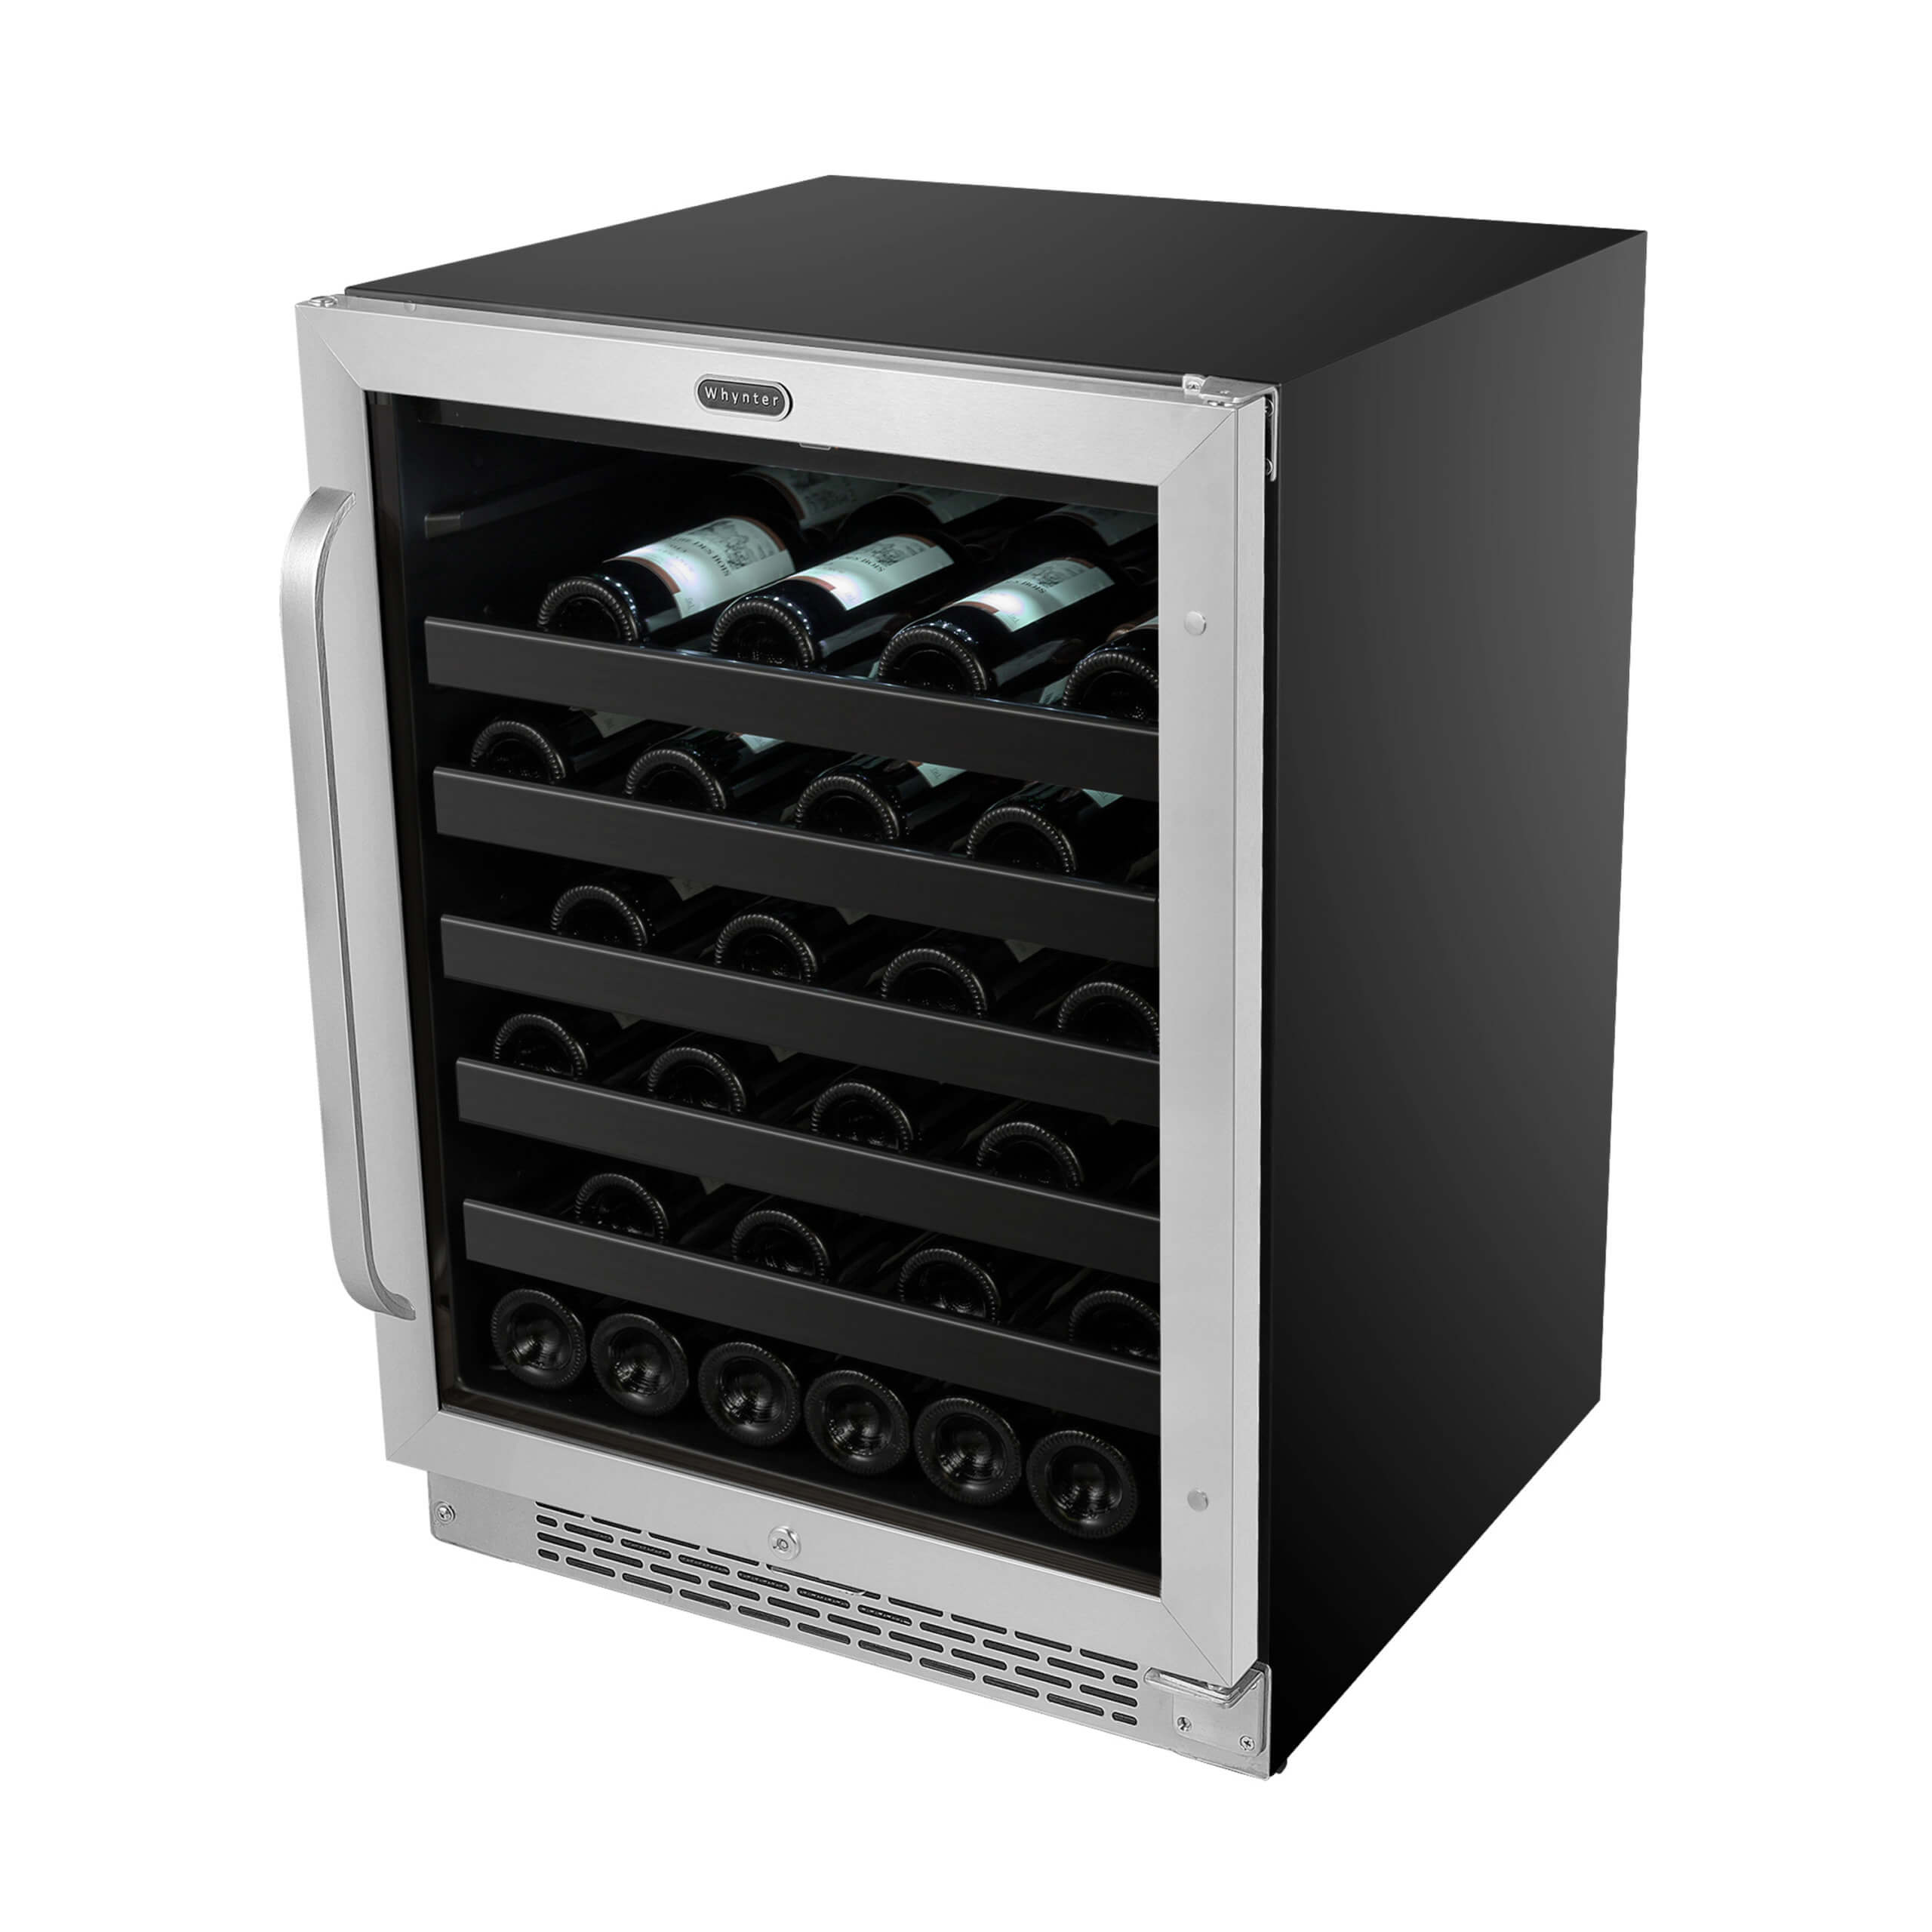 Whynter 24 inch Built-In 46 Bottle Undercounter Stainless Steel Wine Refrigerator with Reversible Door, Digital Control, Lock and Carbon Filter BWR-408SB Wine Coolers BWR-408SB Luxury Appliances Direct